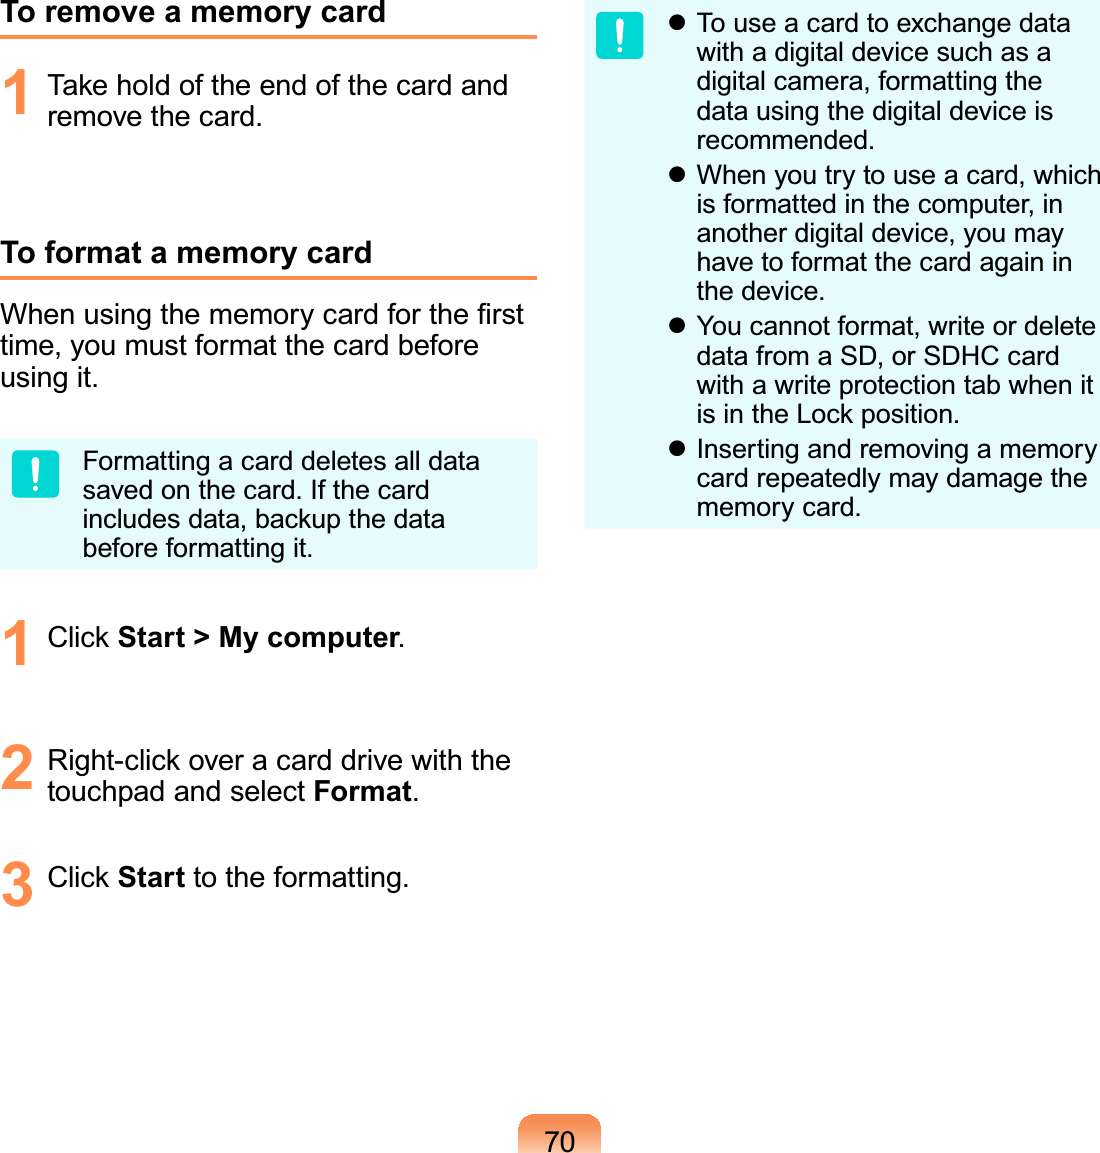 70To remove a memory card1  Take hold of the end of the card and remove the card.To format a memory cardWhen using the memory card for the ﬁrst time, you must format the card before using it.Formatting a card deletes all data saved on the card. If the card includes data, backup the data before formatting it.1 Click Start &gt; My computer.2  Right-click over a card drive with the touchpad and select Format.3 Click Start to the formatting. To use a card to exchange data with a digital device such as a digital camera, formatting the data using the digital device is recommended. When you try to use a card, which is formatted in the computer, in another digital device, you may have to format the card again in the device. You cannot format, write or delete data from a SD, or SDHC card with a write protection tab when it is in the Lock position. Inserting and removing a memory card repeatedly may damage the memory card.